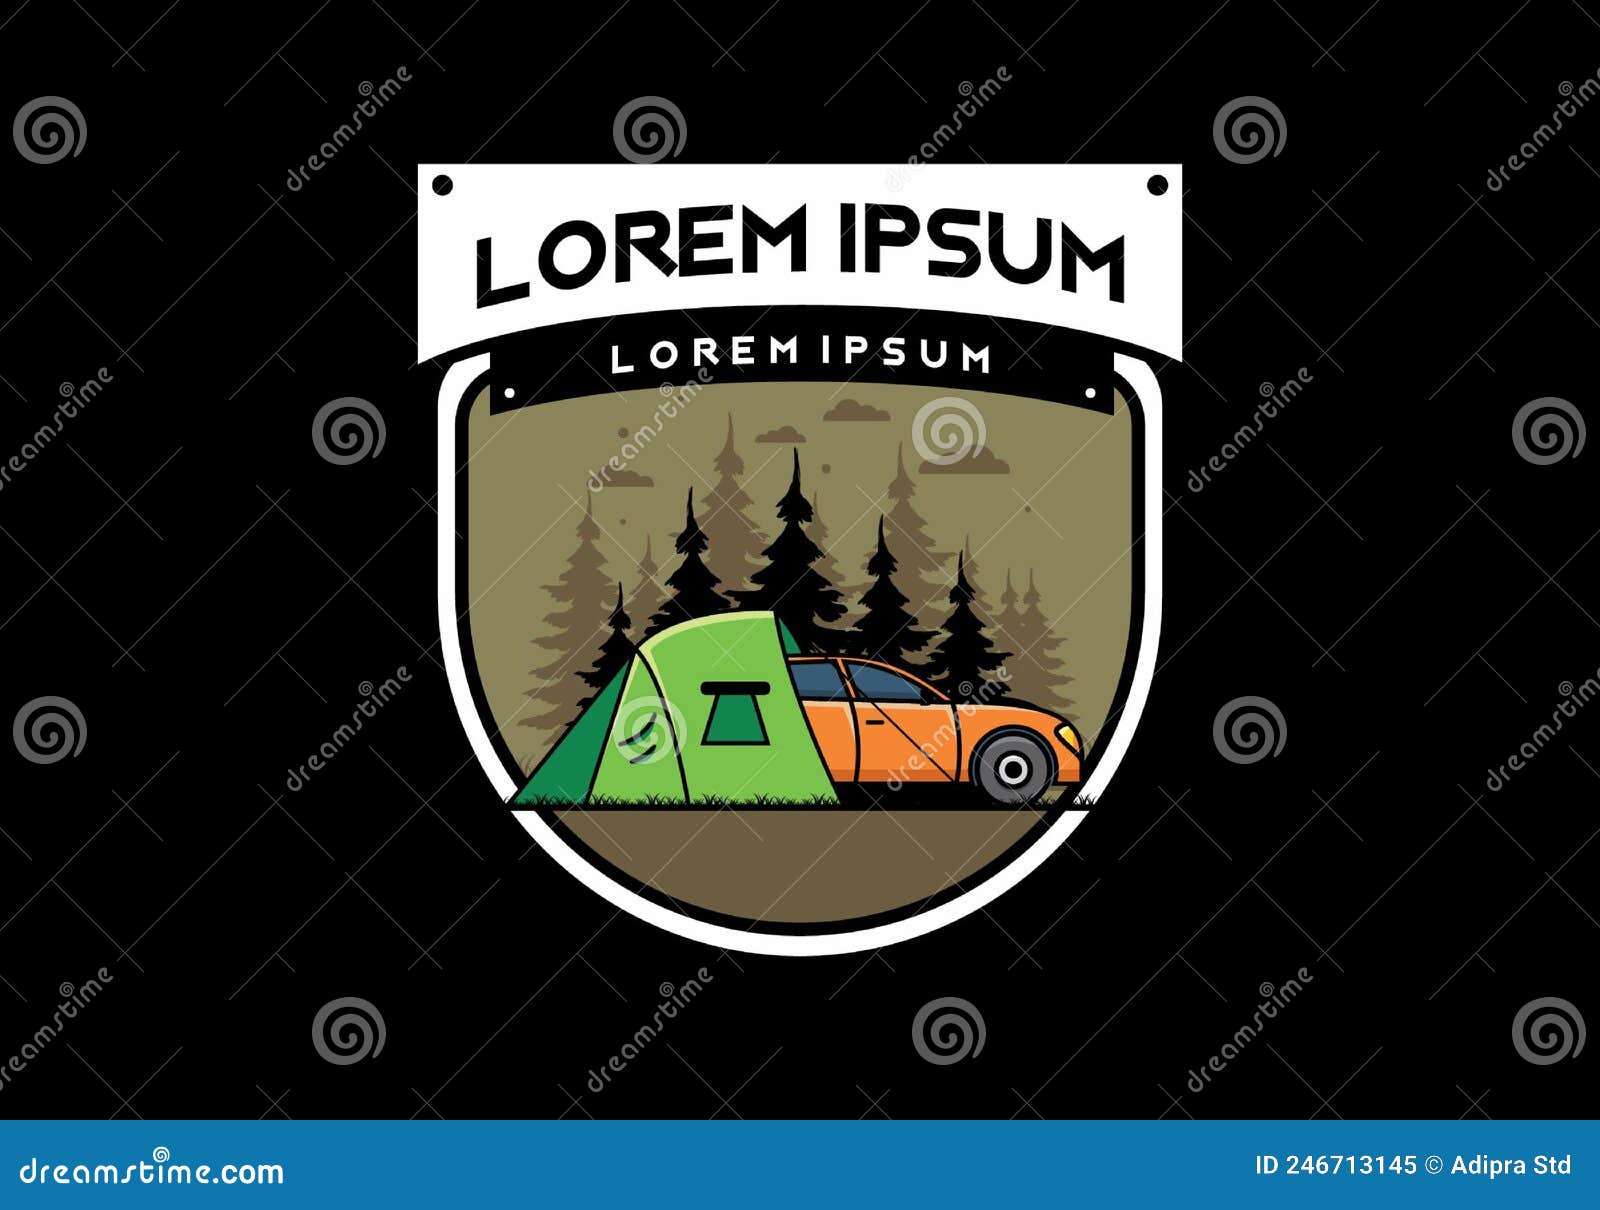 Night Camping with Car Illustration Stock Vector - Illustration of ...